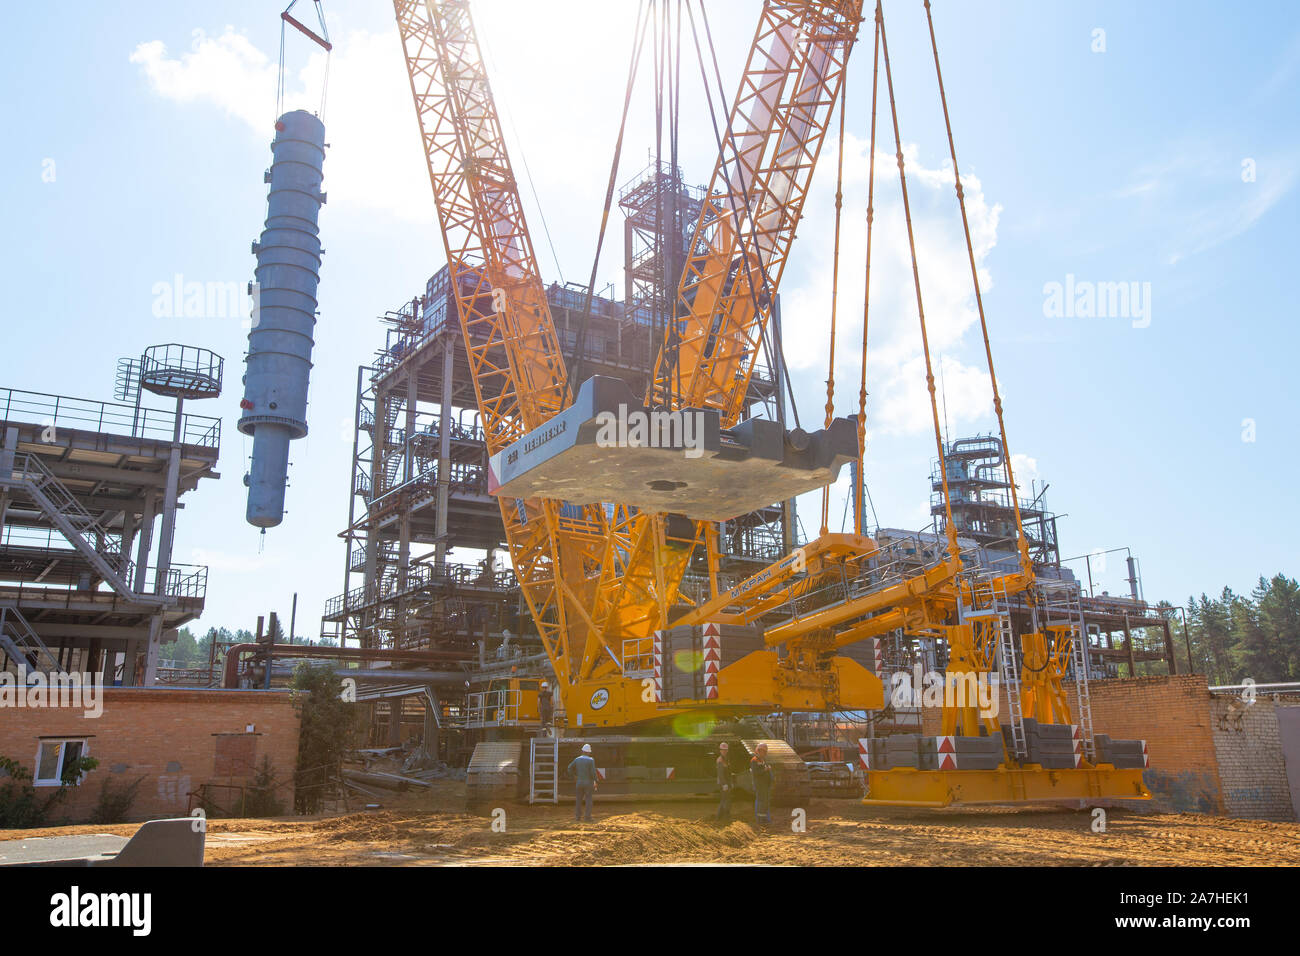 MOSCOW, RUSSIA, 08.2018: The construction of an oil refinery, near Moscow. industrial cranes (LIEBHERR), construction and installation of components o Stock Photo